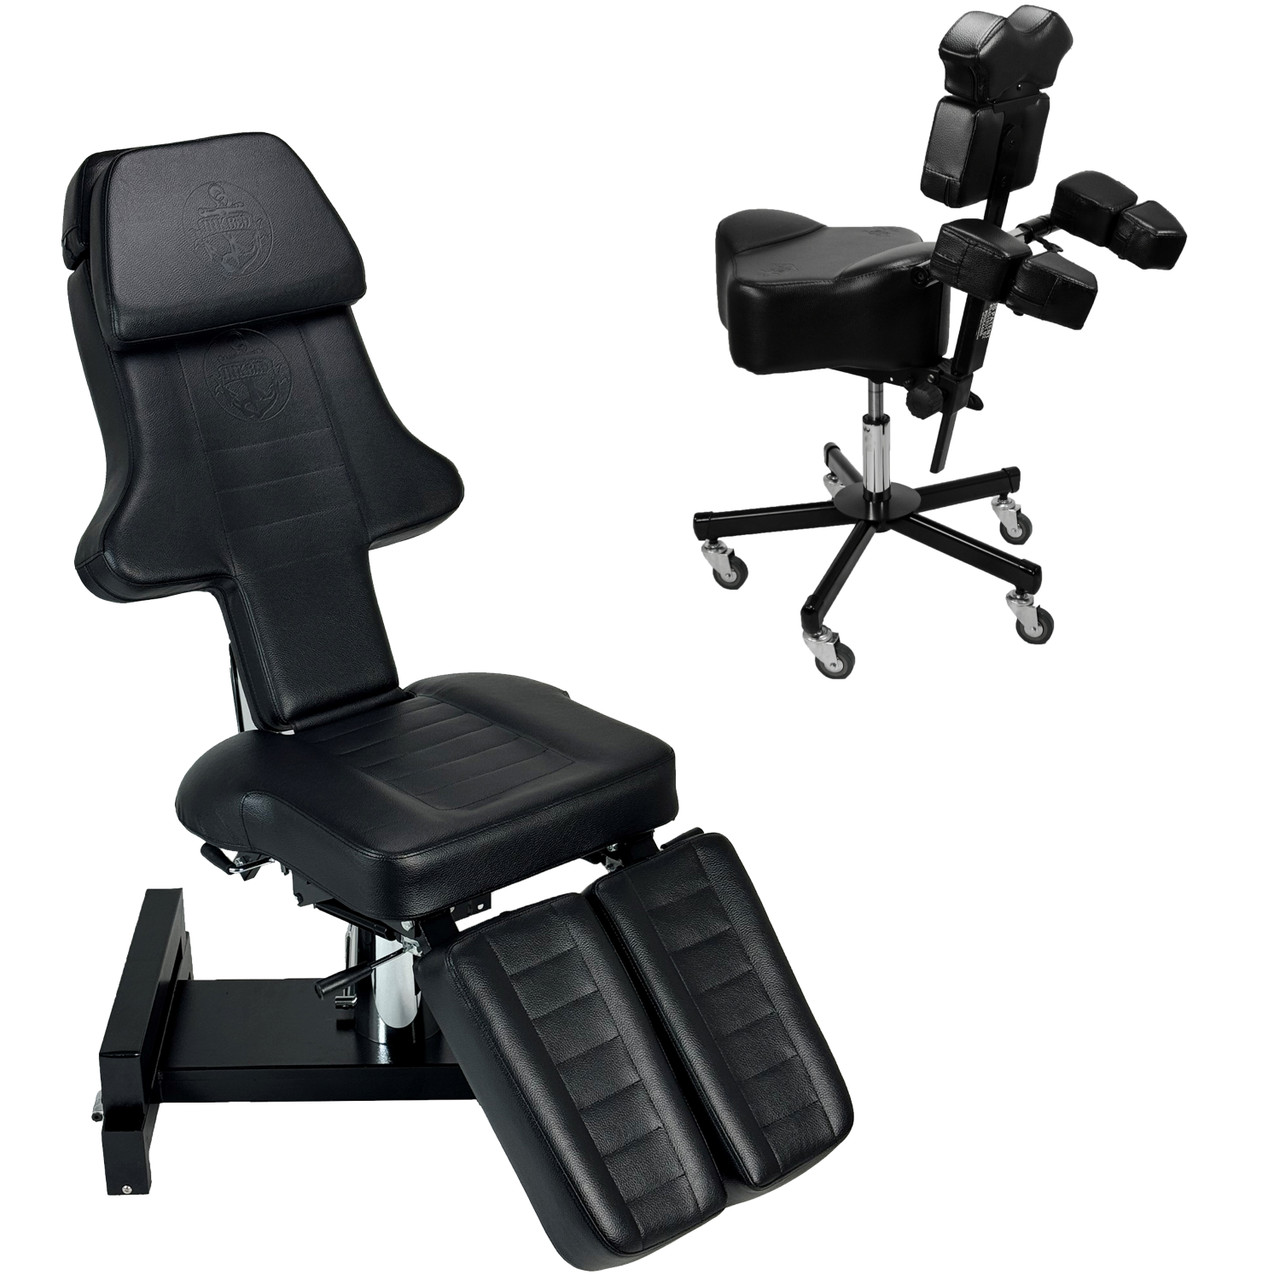 Basic Portable Patient Chair with Hydraulic Base - Dntlworks